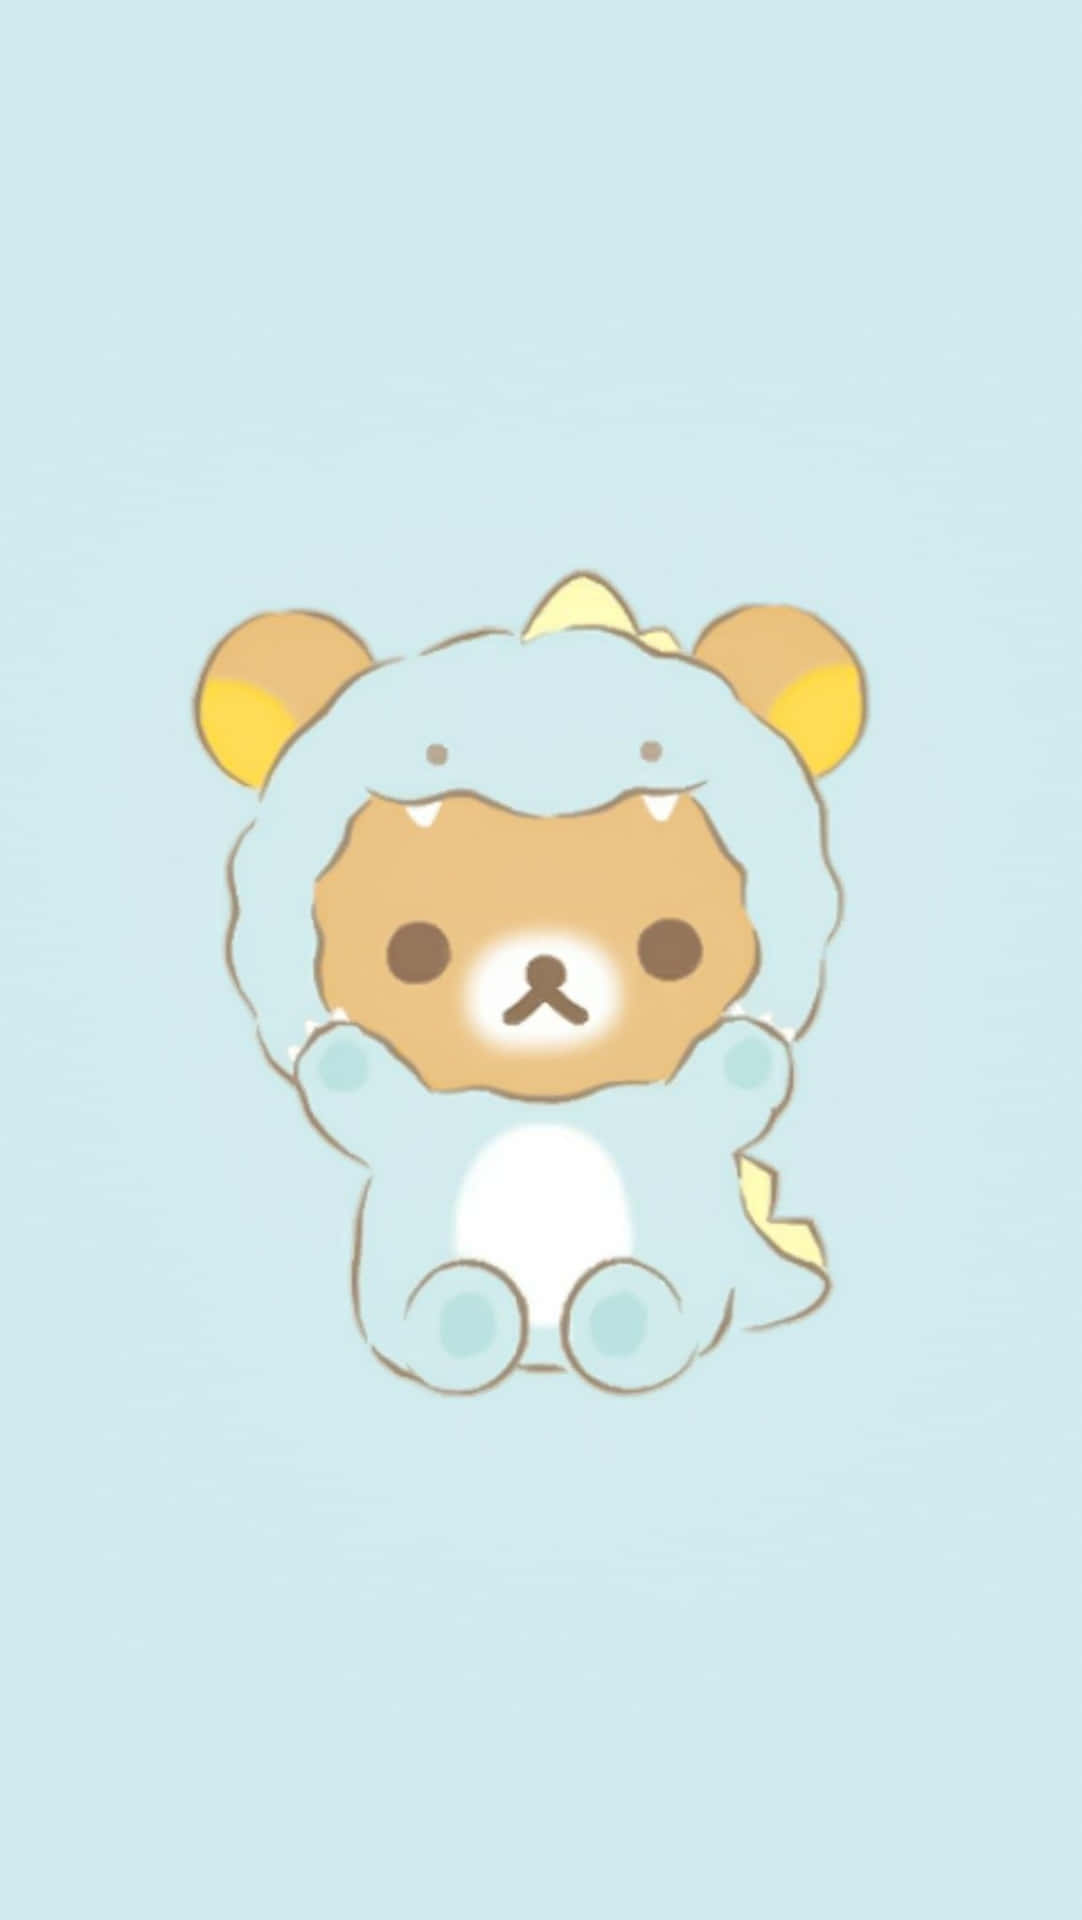 Download Get a daily dose of cuteness with Cute Rilakkuma ...